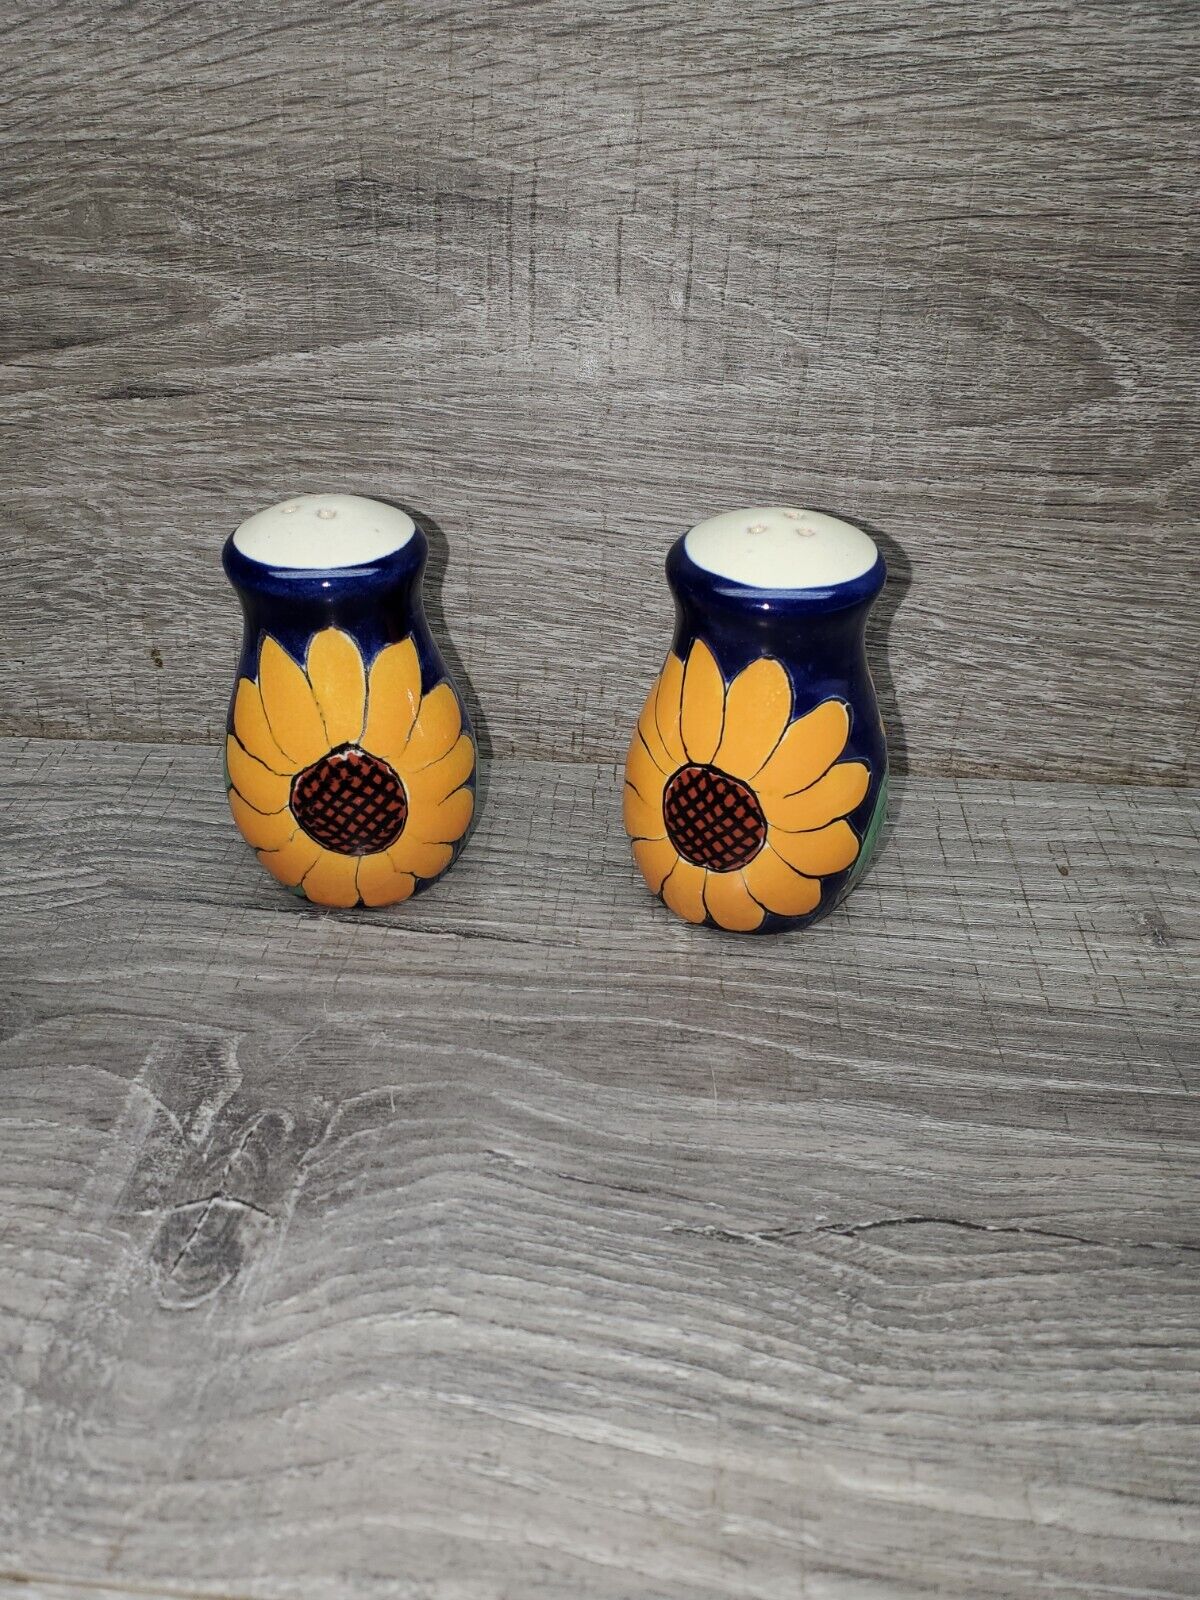 Lead Free Mexico Garay Mexican Pottery  Handpainted Poppy Salt & Pepper Shakers.